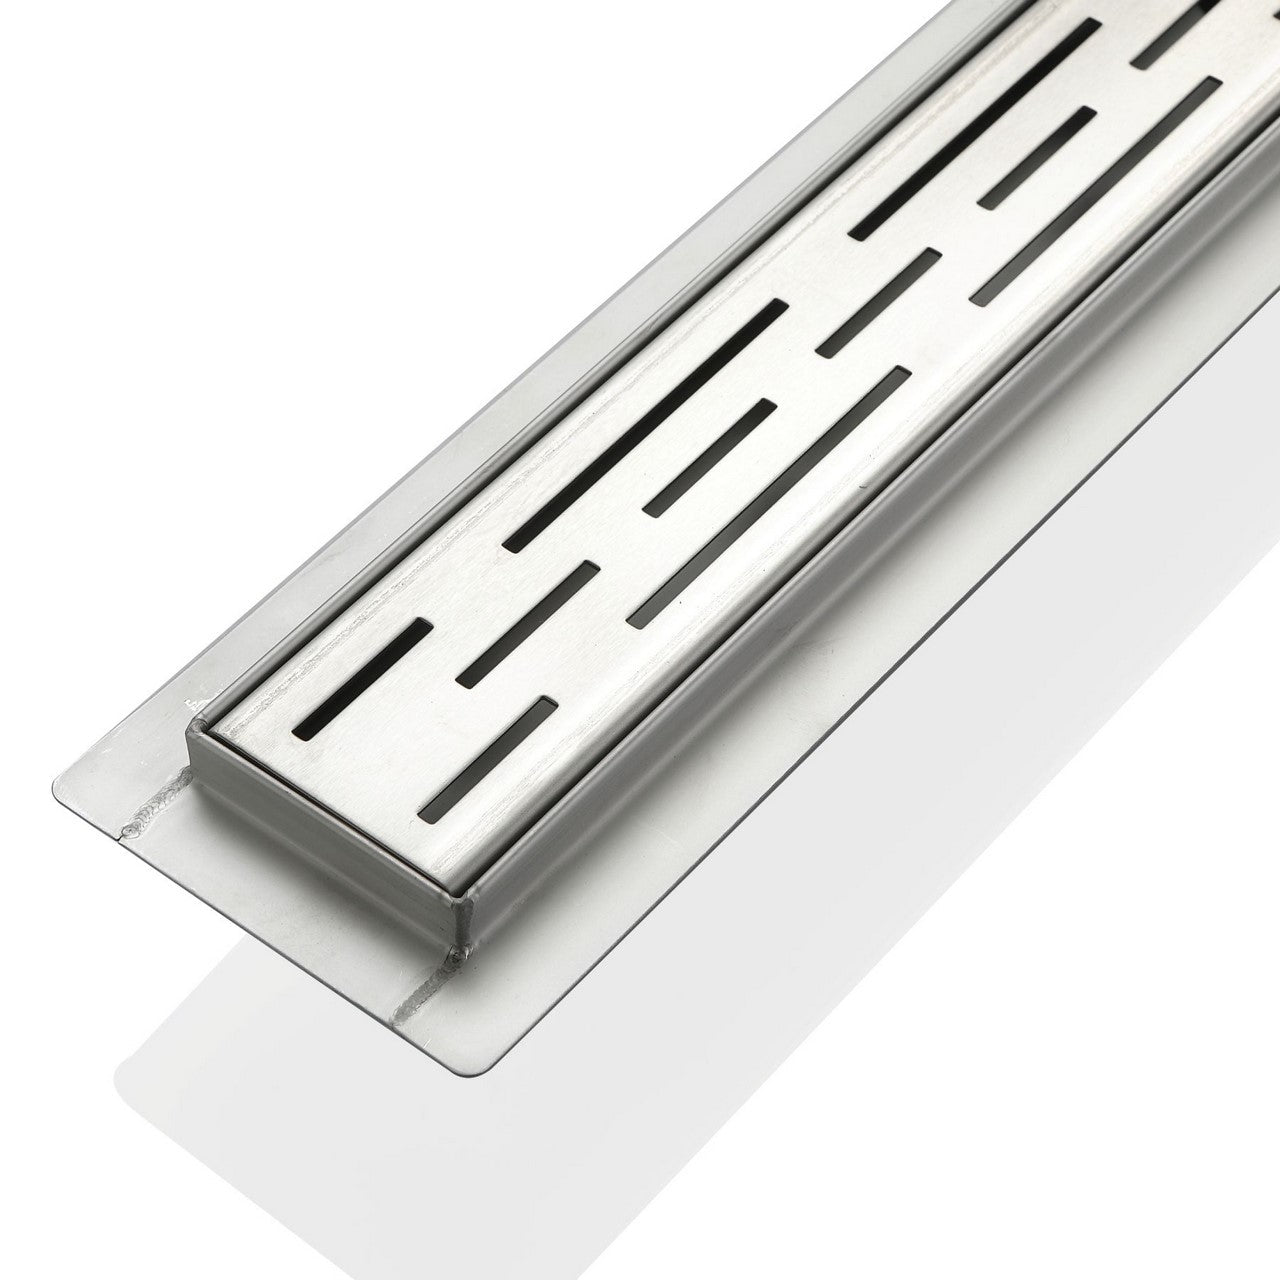 Kube 35.5" Linear Drain with Linear Grate - Bhdepot 